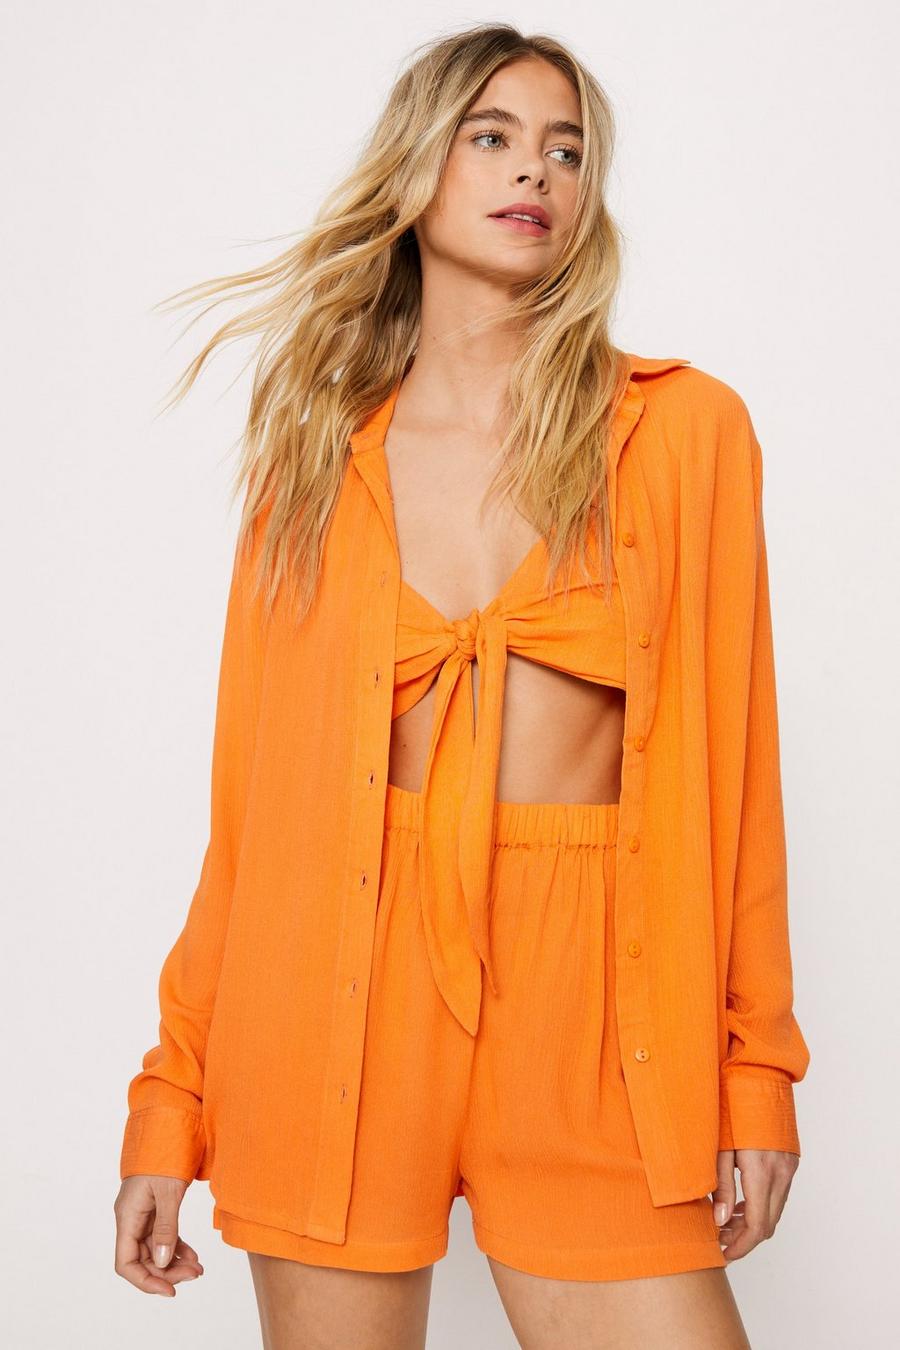 Bralette Shirt and Shorts 3pc Beach Cover Up Set